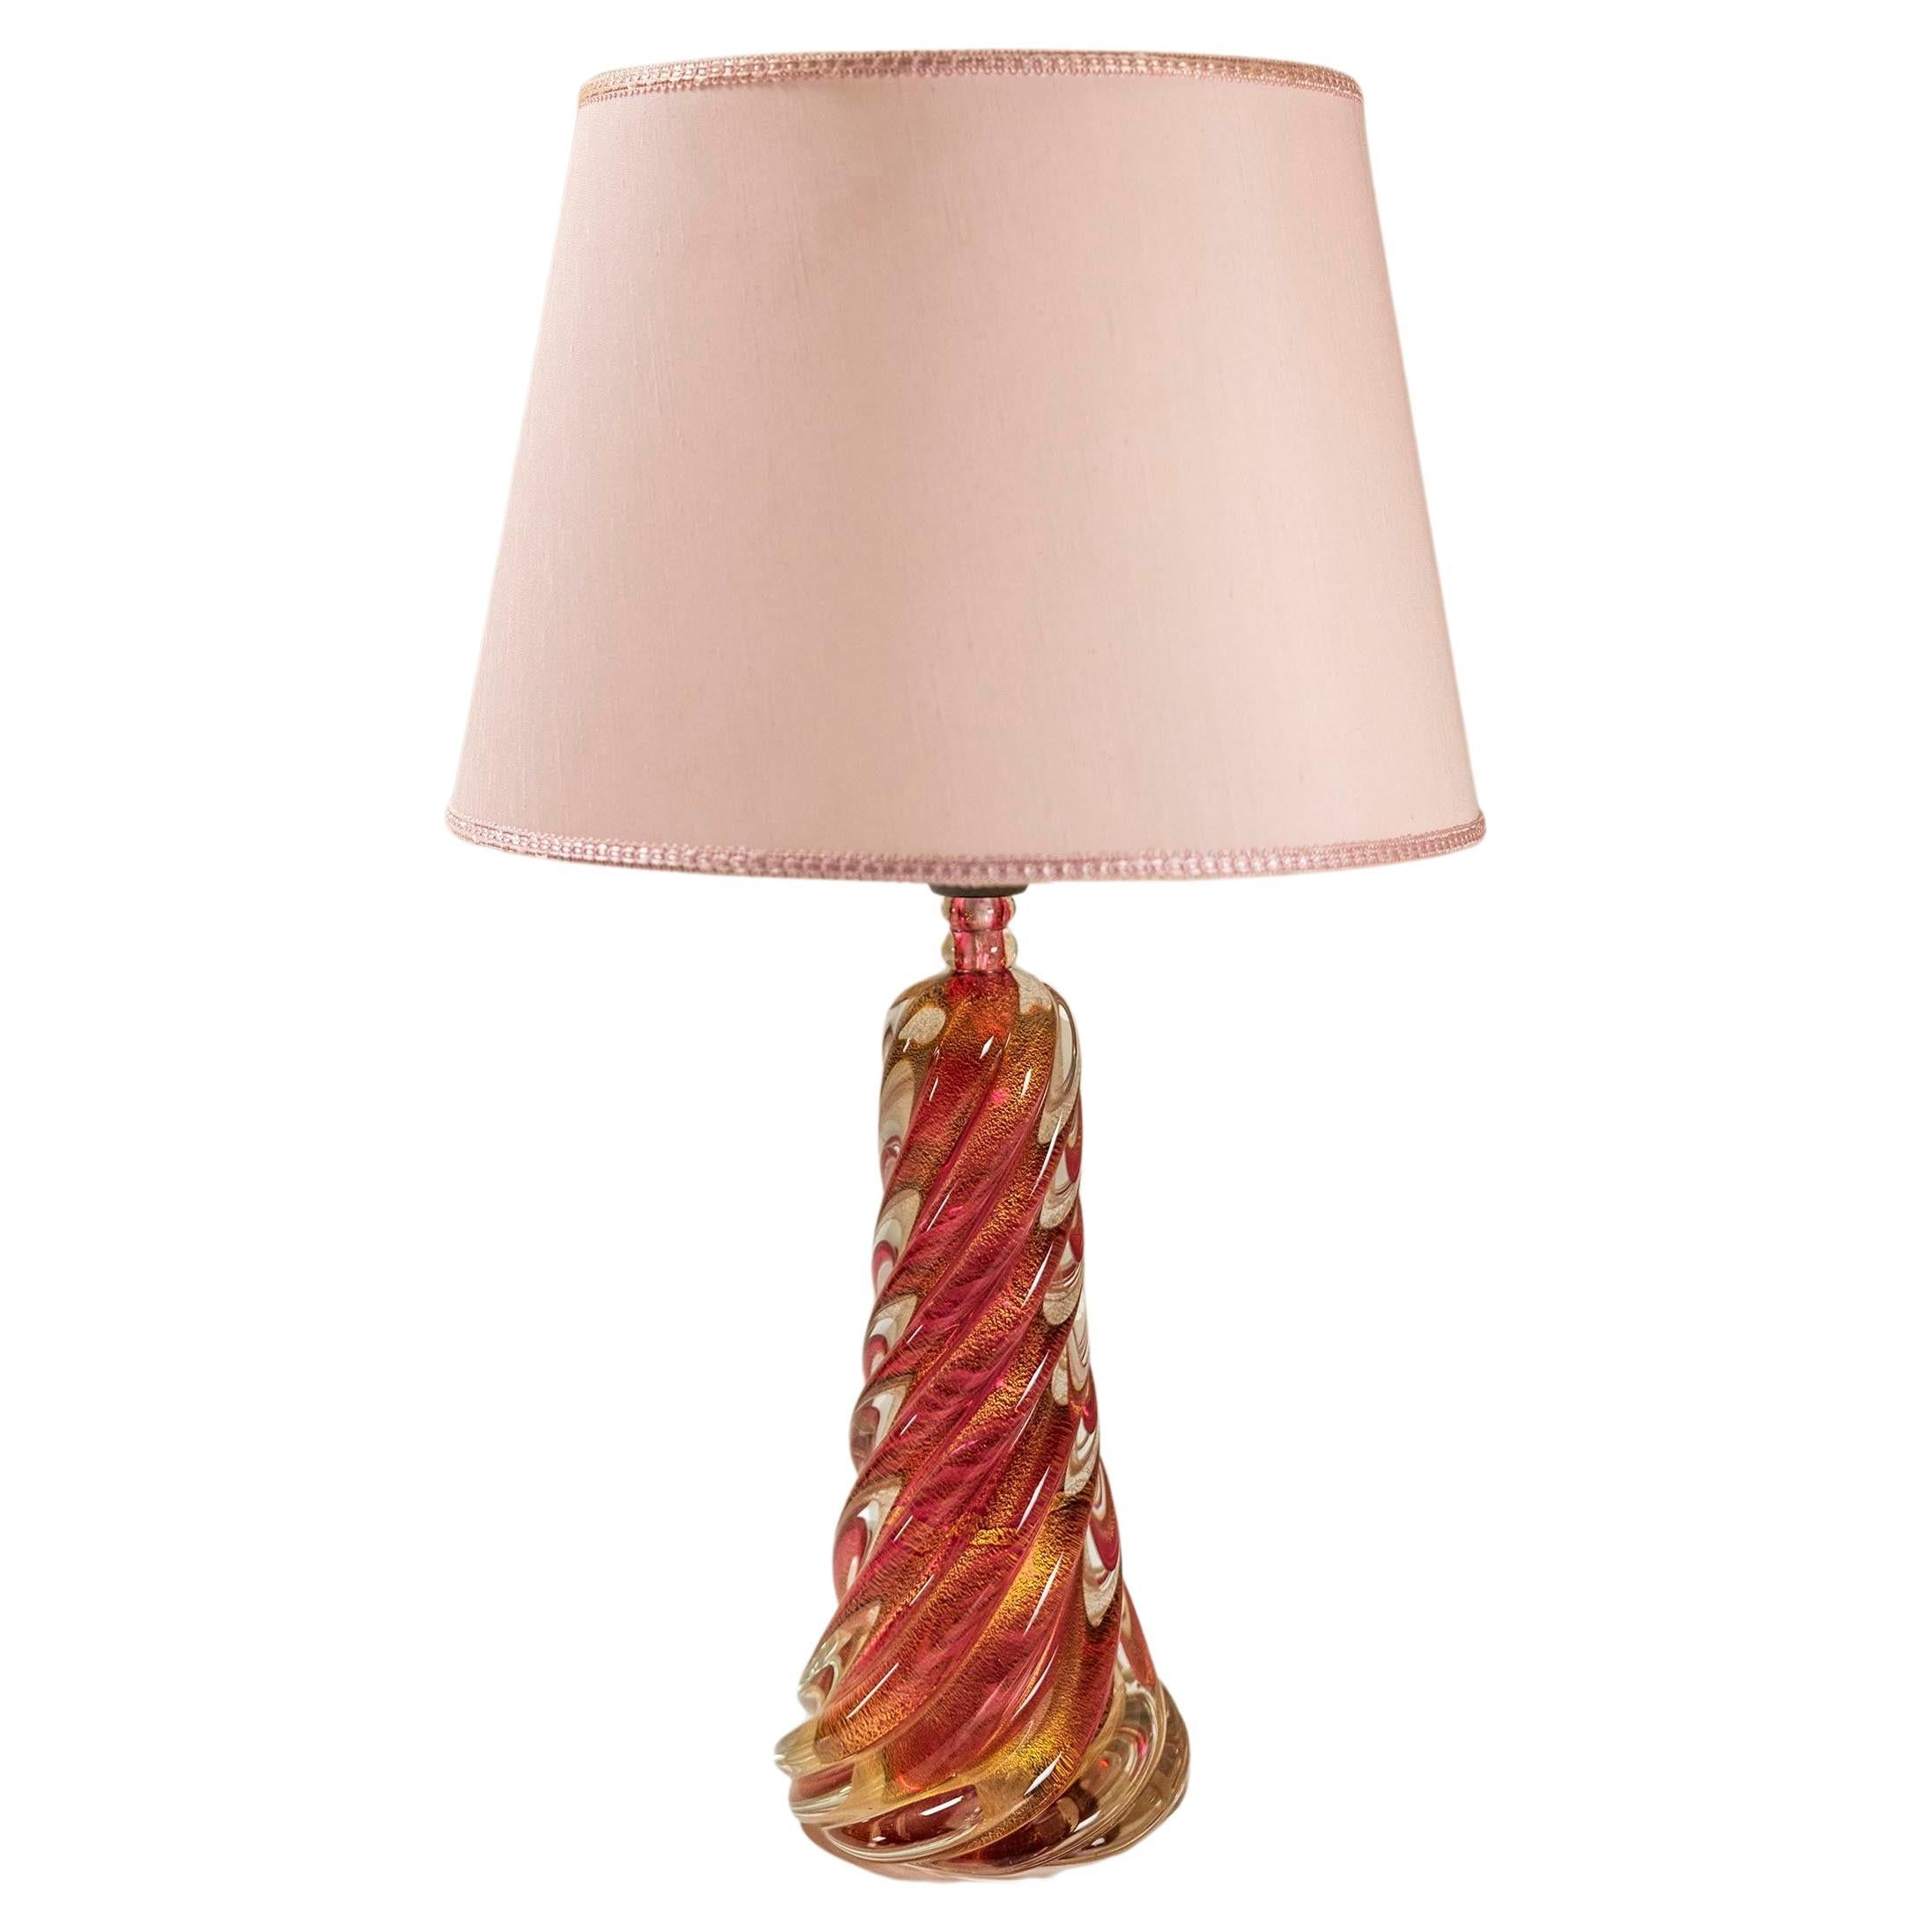 Spiral Shaped Table Lamp in Pink-Colored Murano Glass, Italy 1950s For Sale